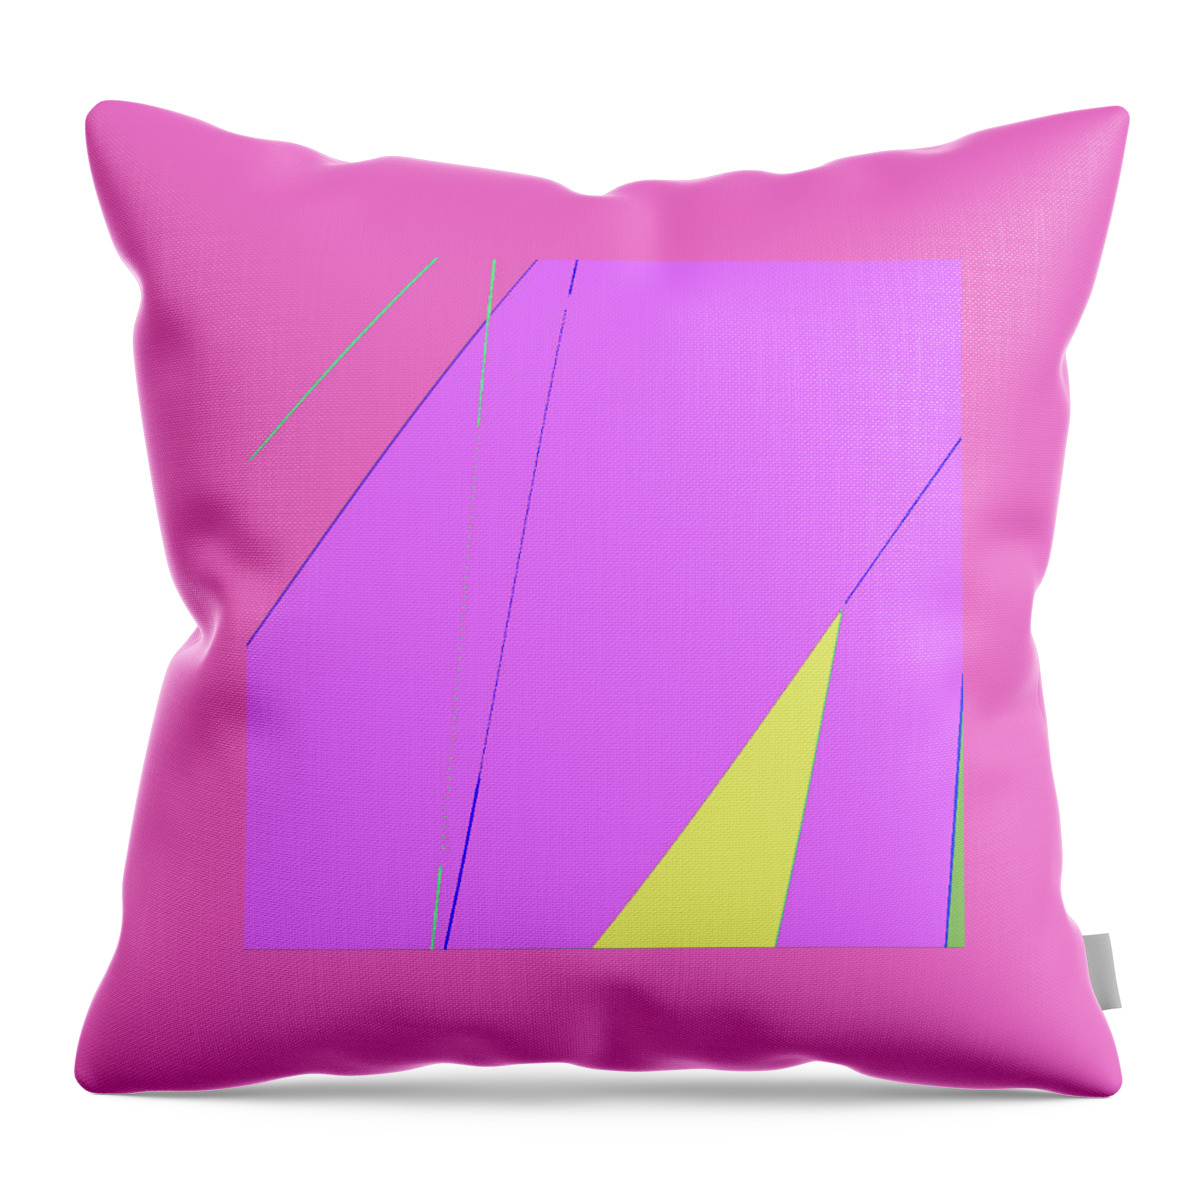  Throw Pillow featuring the digital art Abstract by Art Store Home